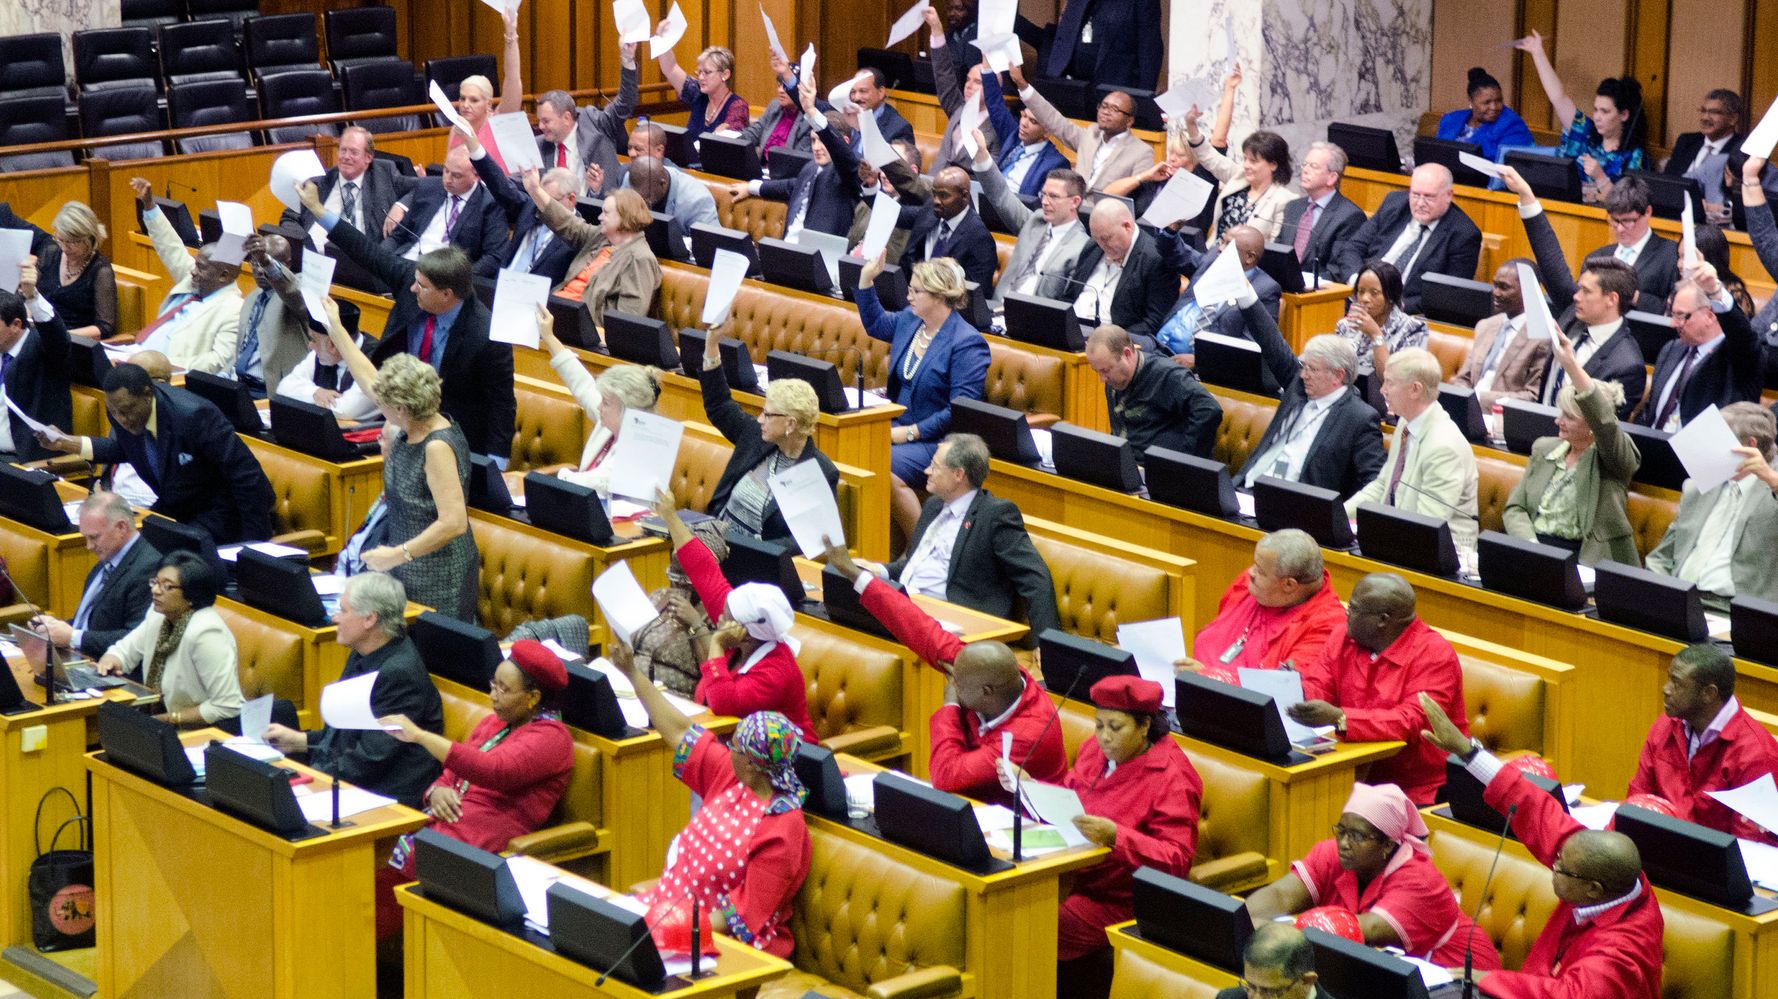 It's Either The Parliament Of South Africa Or A Stand-Up Comedy Venue |  HuffPost UK News